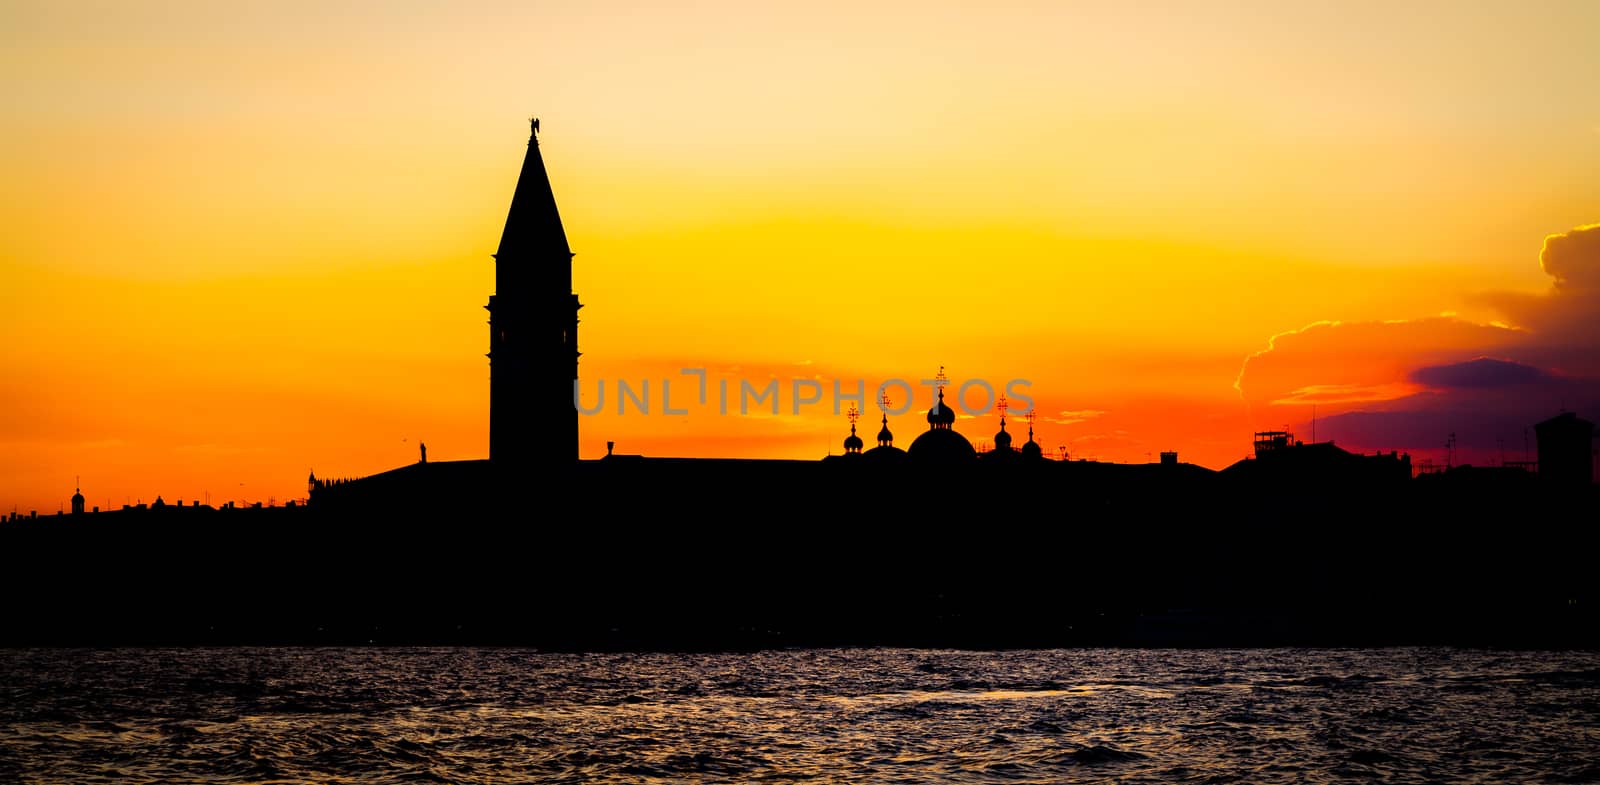 Sunset in Venice, Italy by Perseomedusa